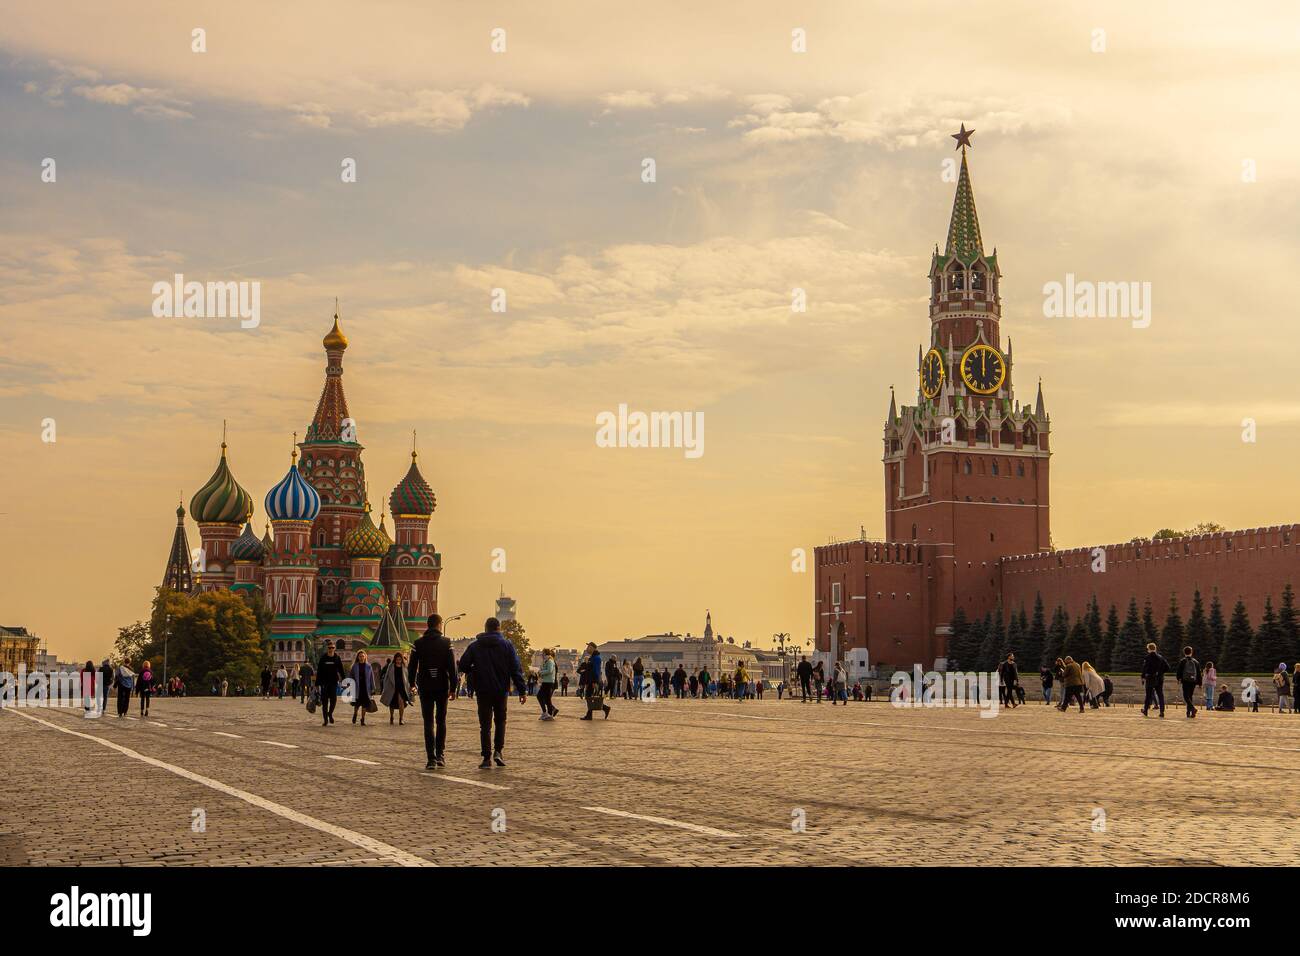 MOSCOW, RUSSIA - NOVEMBER 18, 2020: Red square,view of St. Basil's Cathedral and the Spasskaya tower of the Kremlin. Red Square sunrise with beautiful Stock Photo